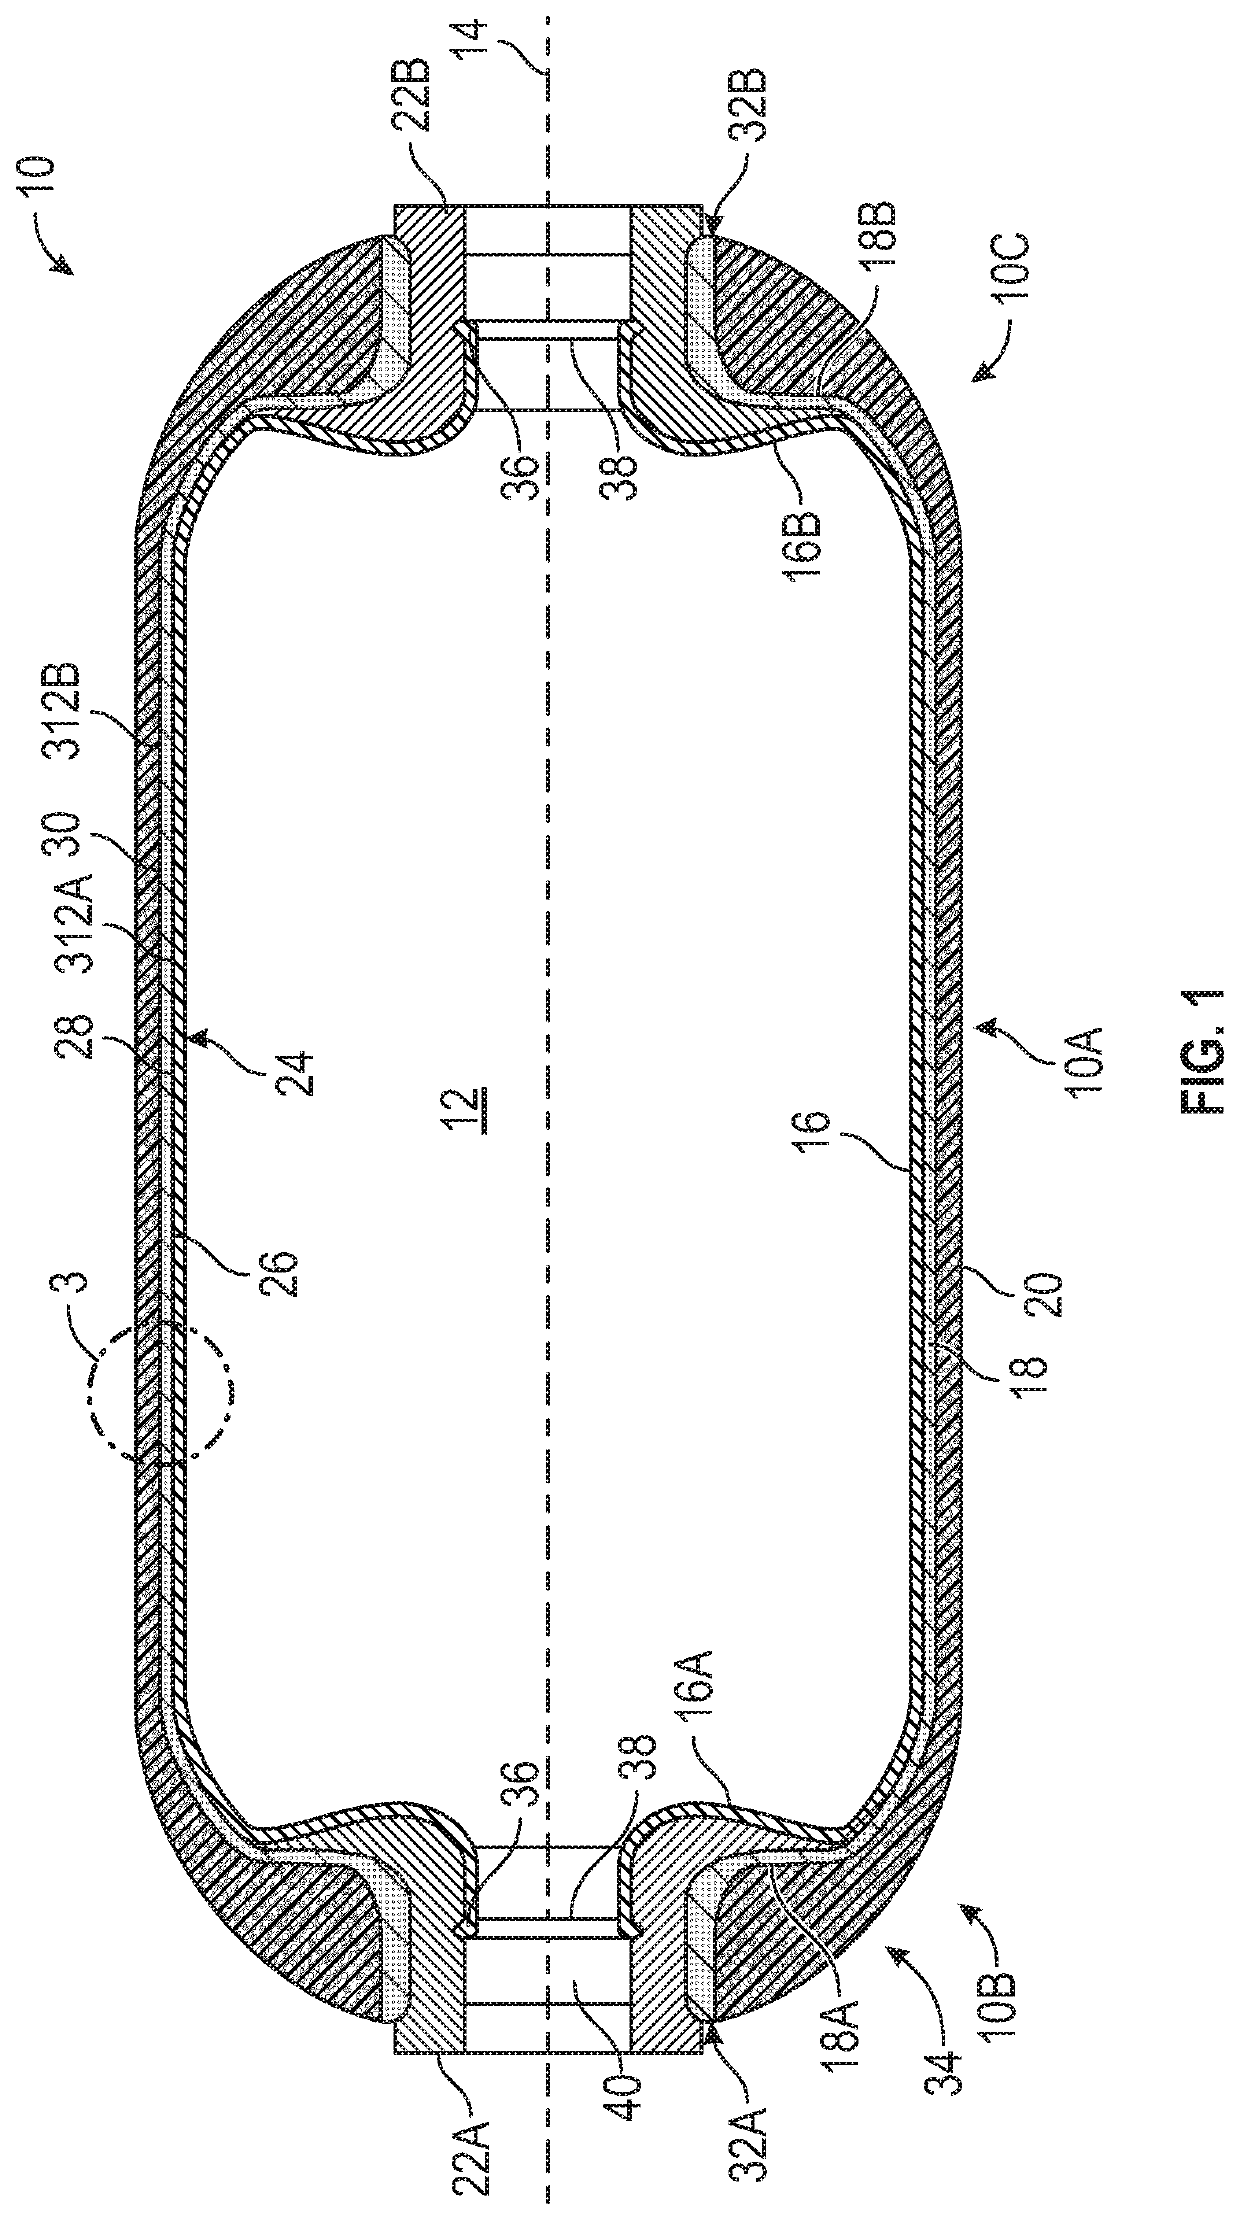 Storage tank for pressurized gas and method of manufacturing same